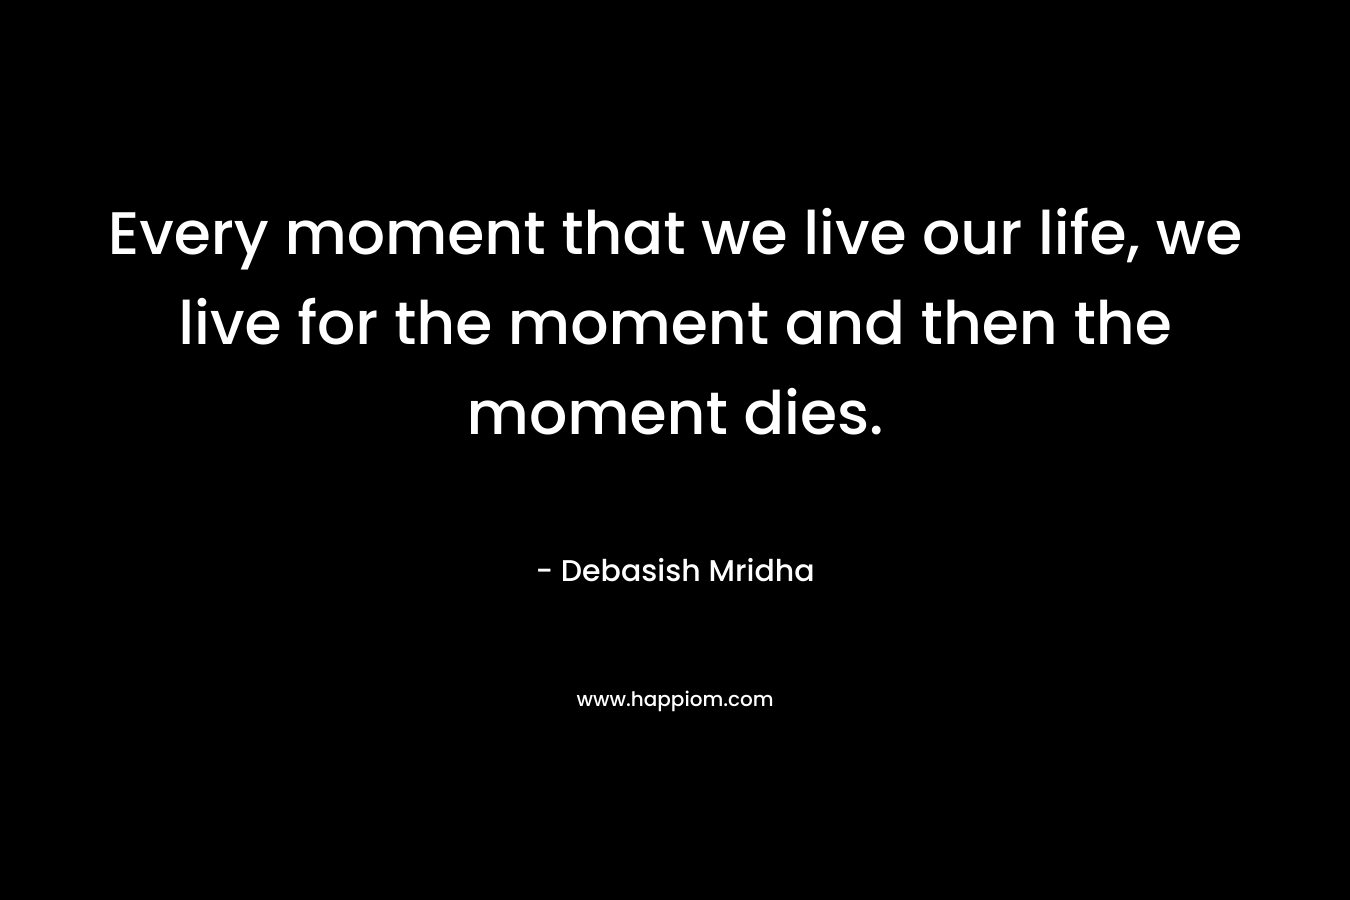 Every moment that we live our life, we live for the moment and then the moment dies.